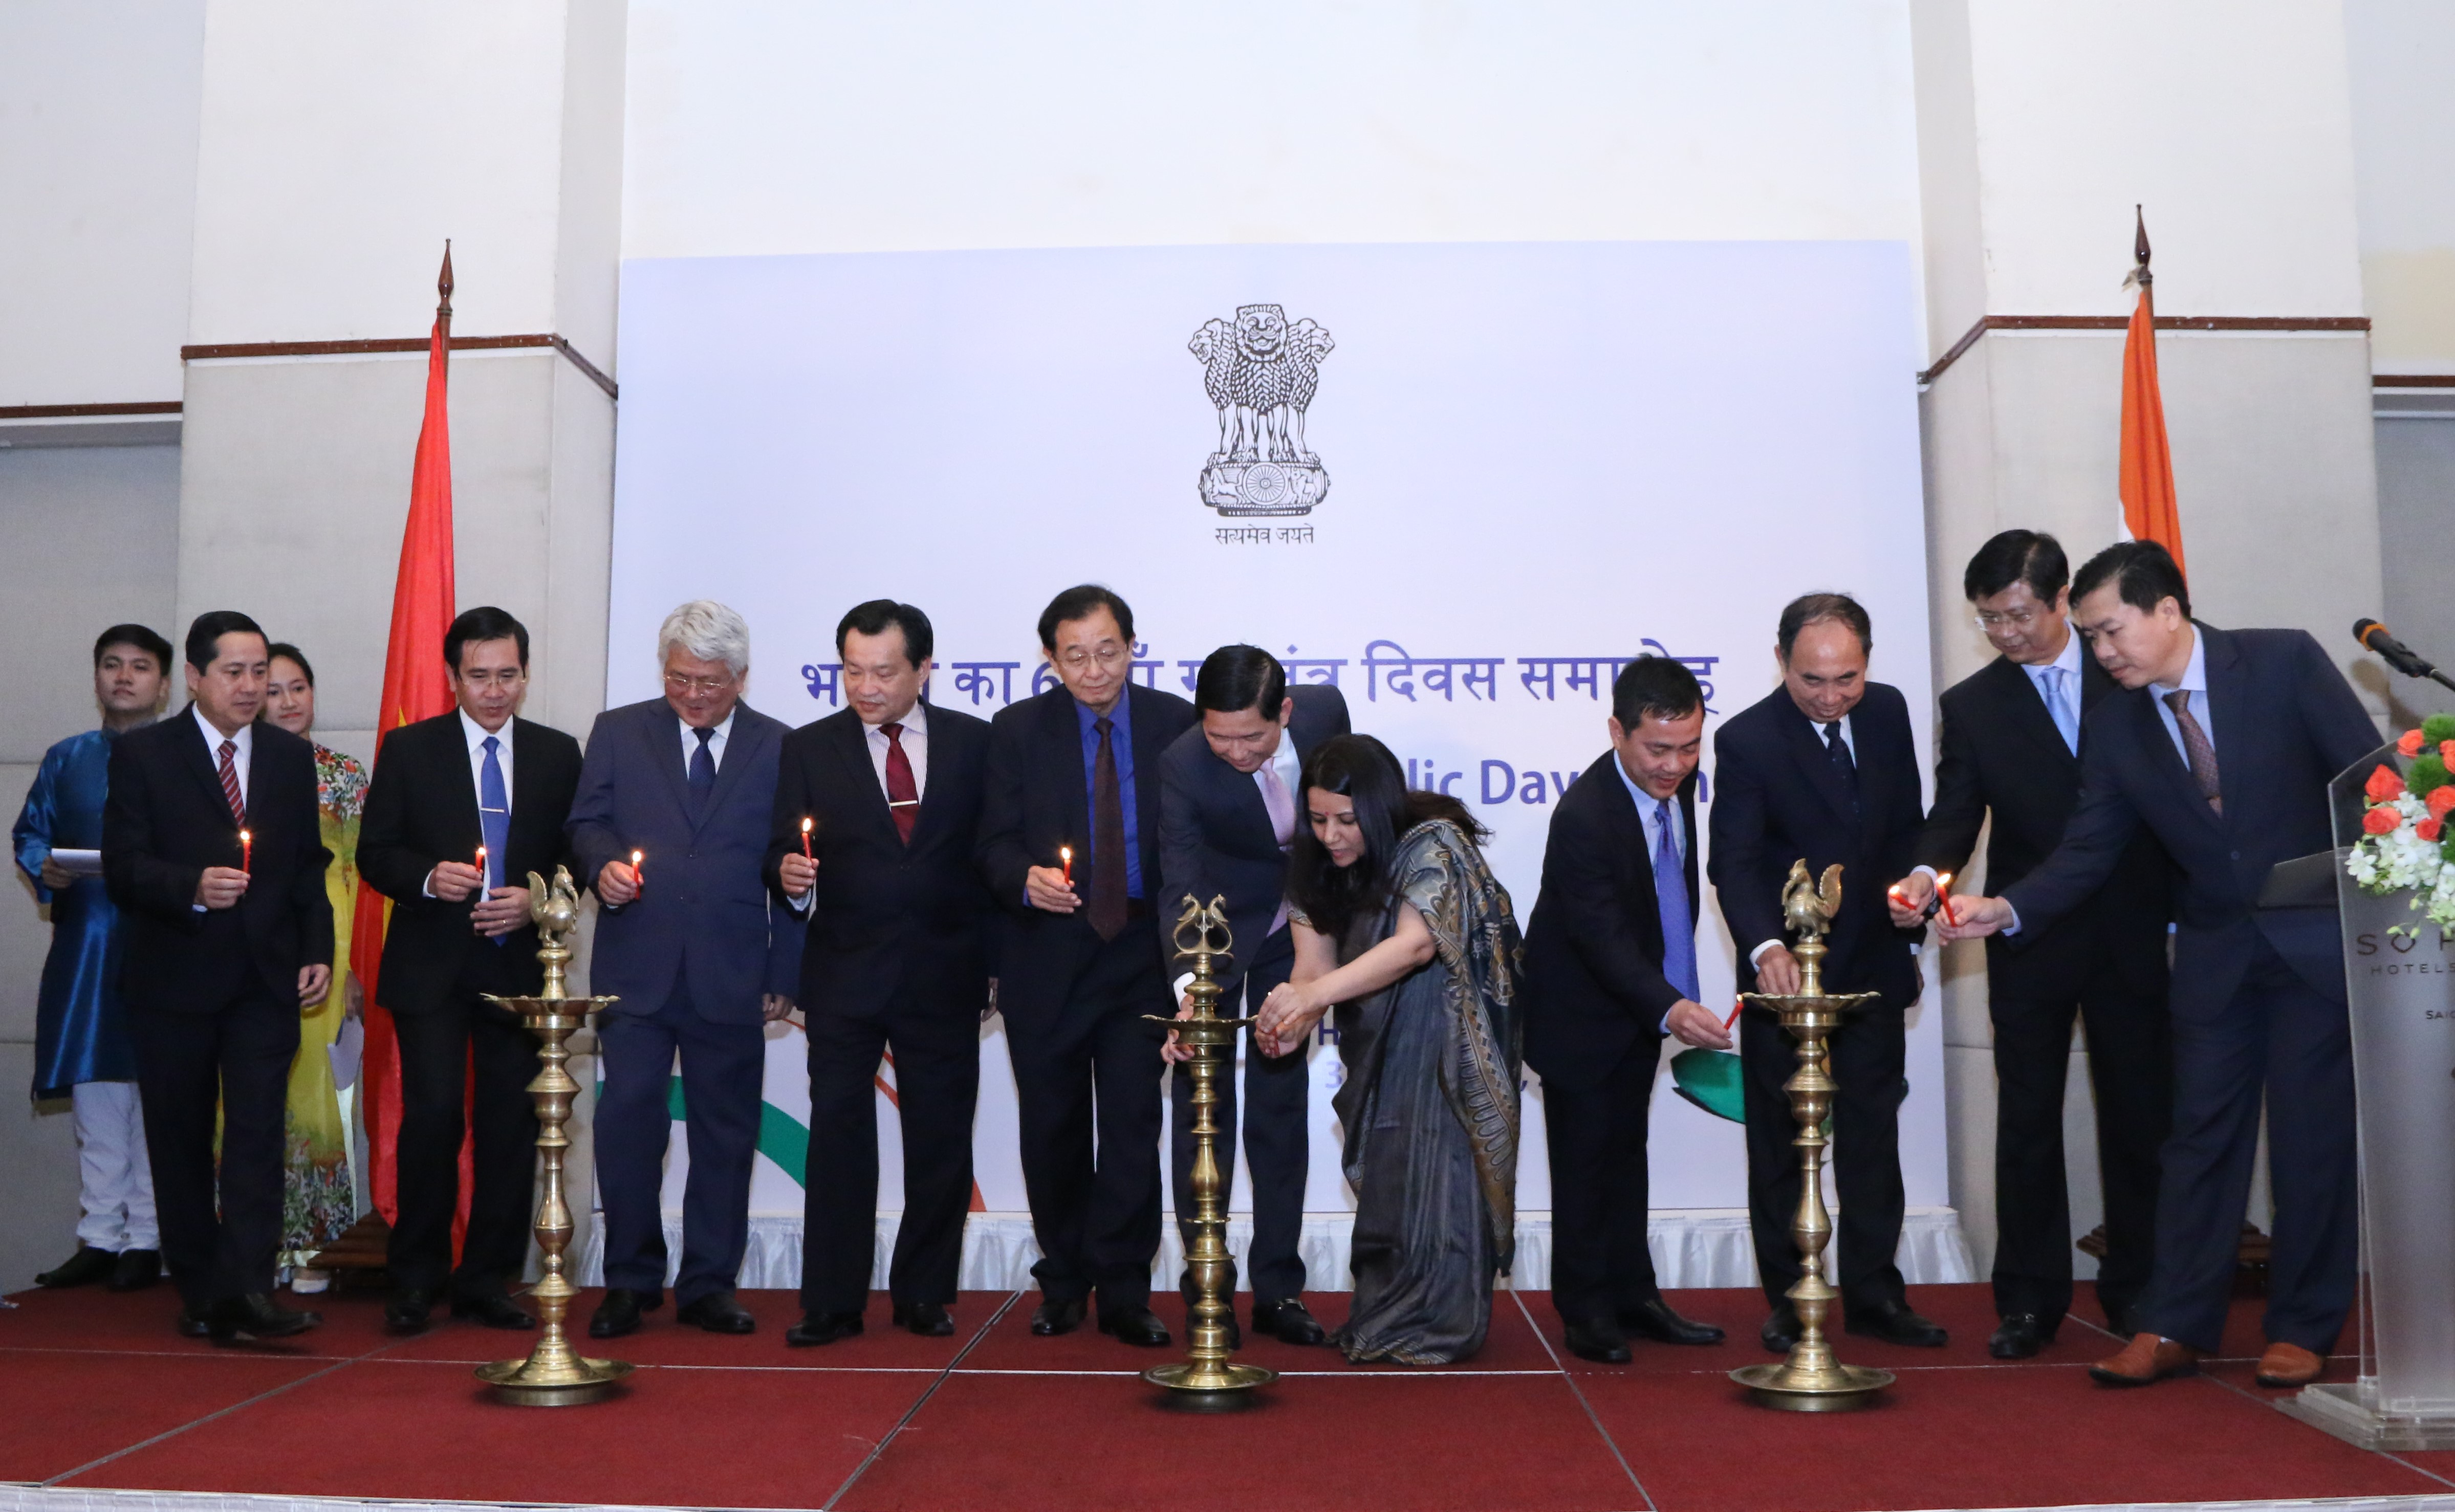 Over 35 Indian commercial, trade delegations visited Ho Chi Minh City last year